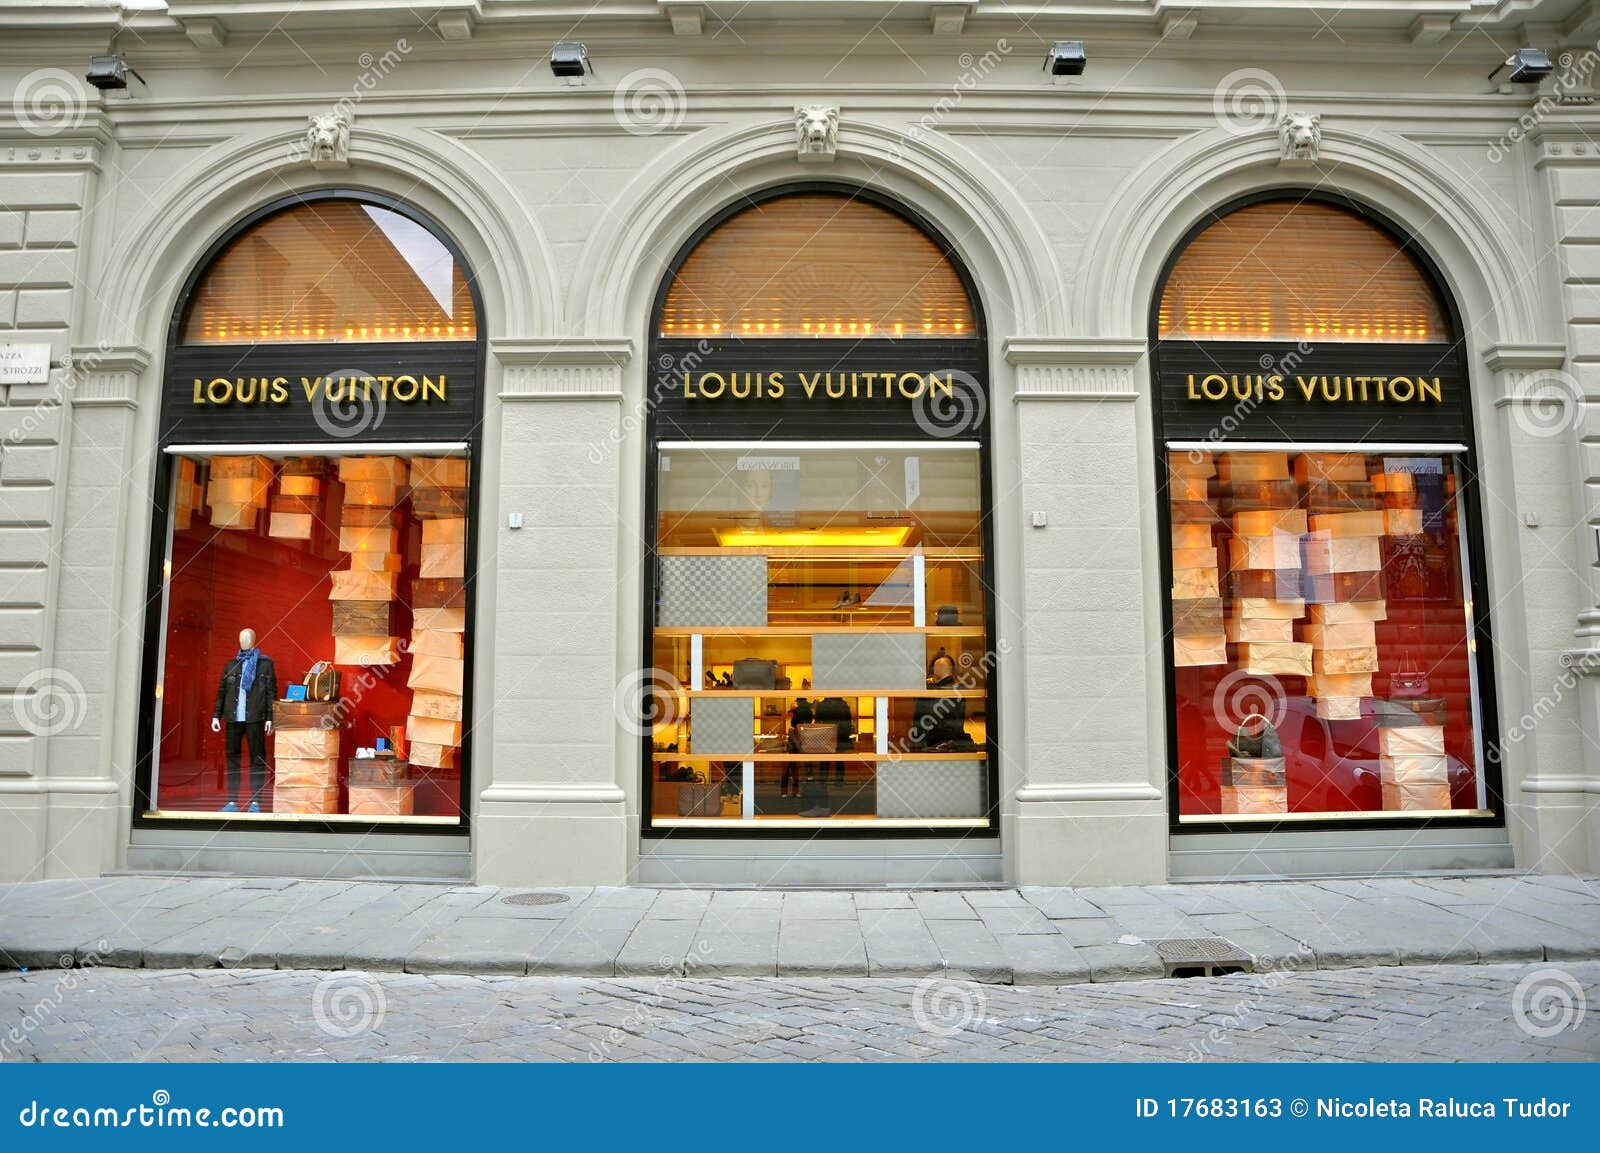 Louis Vuitton Fashion Boutique In Italy Editorial Stock Photo - Image: 17683163